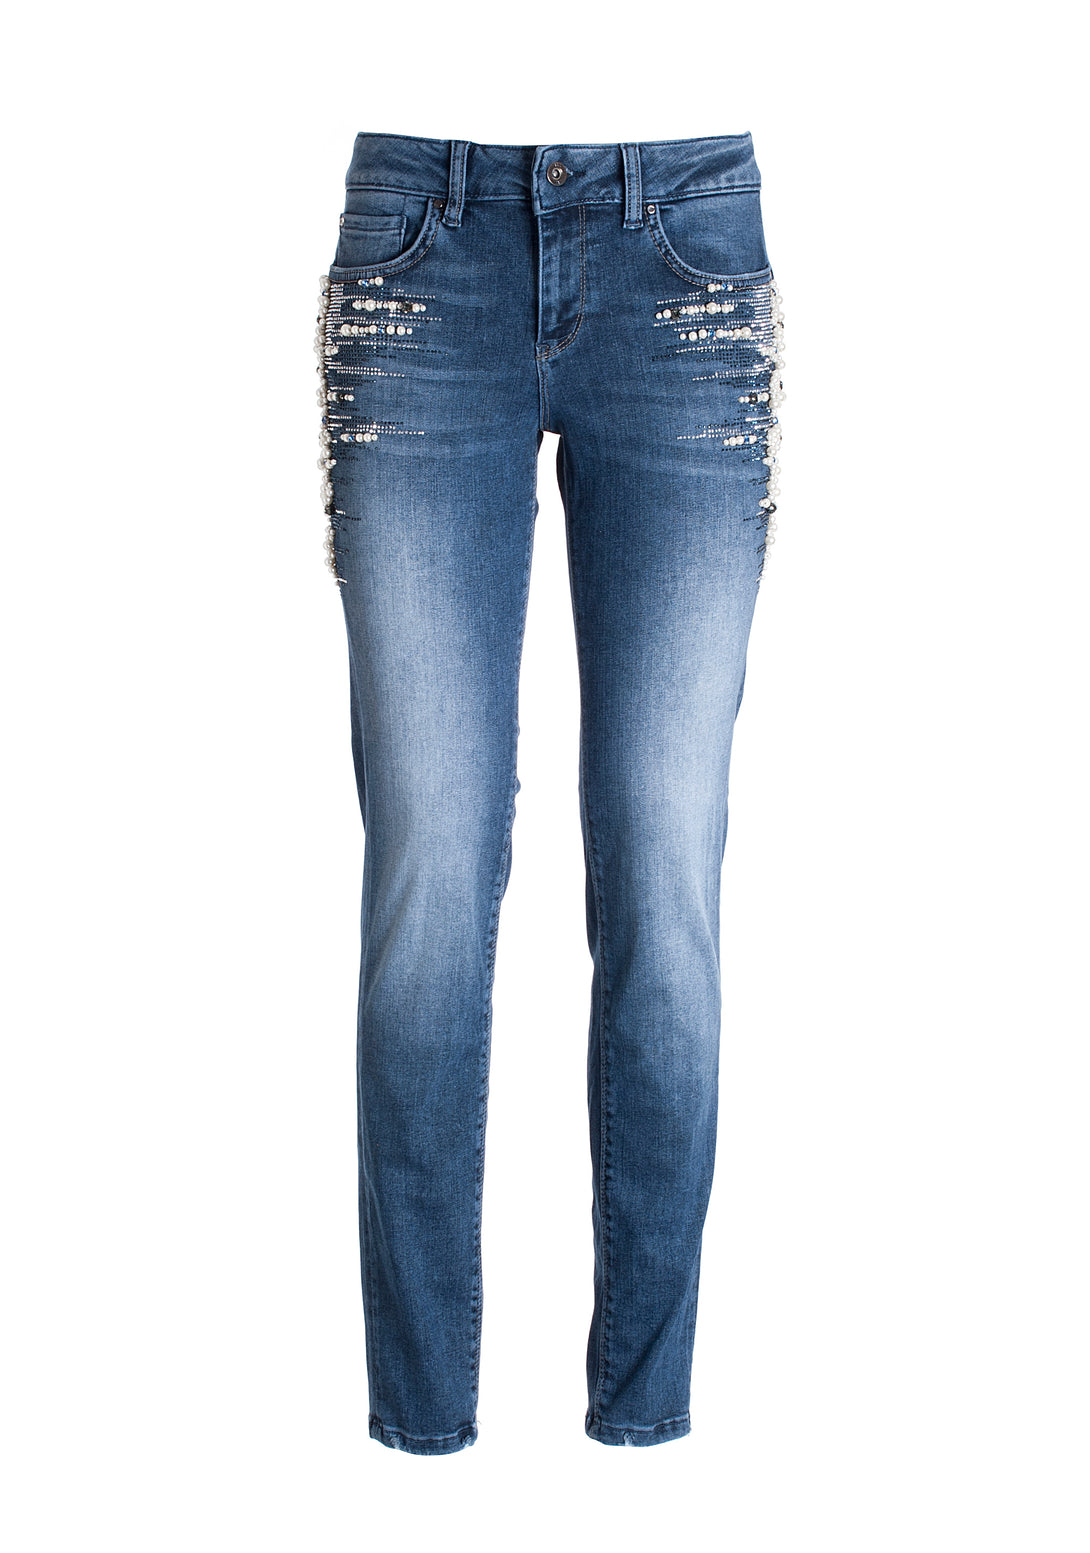 Jeans skinny fit with push-up effect made in denim with middle wash